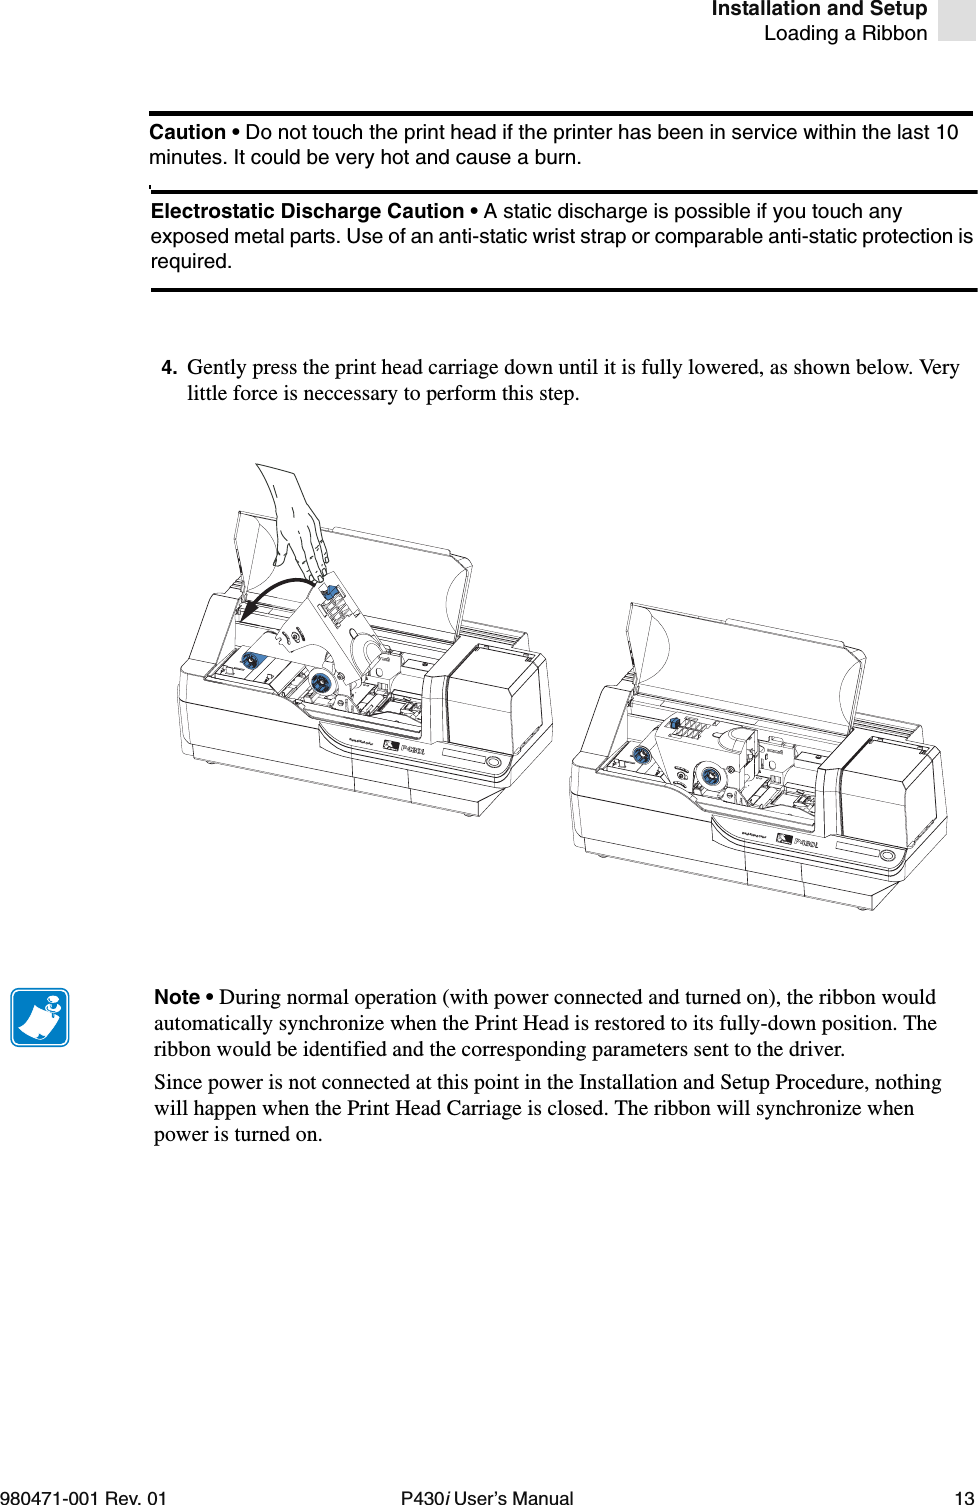 Installation and SetupLoading a Ribbon980471-001 Rev. 01 P430i User’s Manual 134. Gently press the print head carriage down until it is fully lowered, as shown below. Very little force is neccessary to perform this step.Caution • Do not touch the print head if the printer has been in service within the last 10 minutes. It could be very hot and cause a burn.Electrostatic Discharge Caution • A static discharge is possible if you touch any exposed metal parts. Use of an anti-static wrist strap or comparable anti-static protection is required.Dual-Sided ColorDual-Sided ColorNote • During normal operation (with power connected and turned on), the ribbon would automatically synchronize when the Print Head is restored to its fully-down position. The ribbon would be identified and the corresponding parameters sent to the driver.Since power is not connected at this point in the Installation and Setup Procedure, nothing will happen when the Print Head Carriage is closed. The ribbon will synchronize when power is turned on.